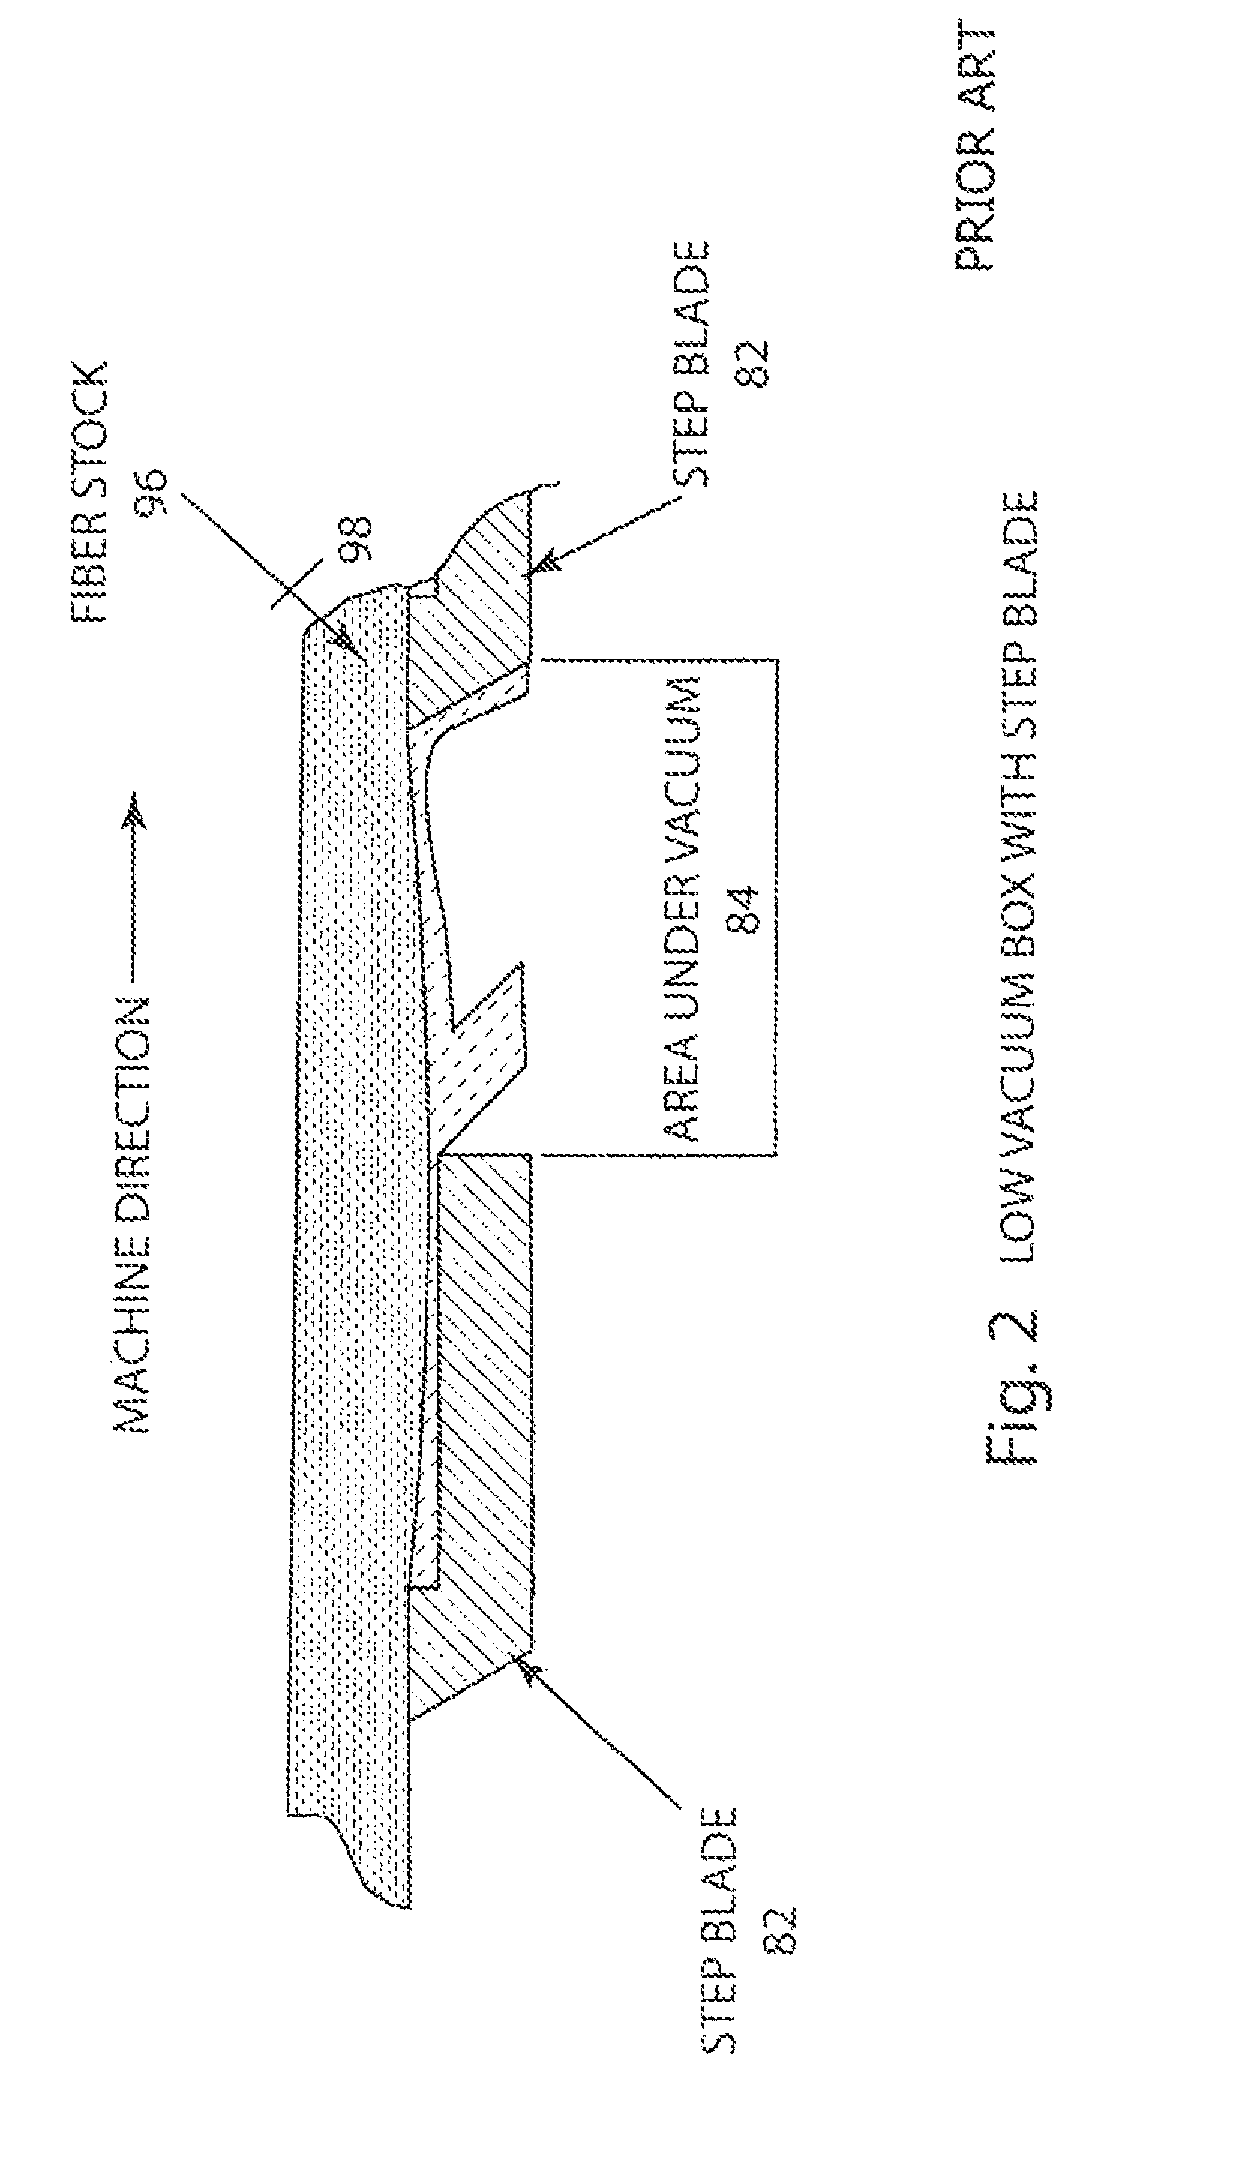 Energy saving papermaking forming apparatus, system, and method for lowering consistency of fiber suspension